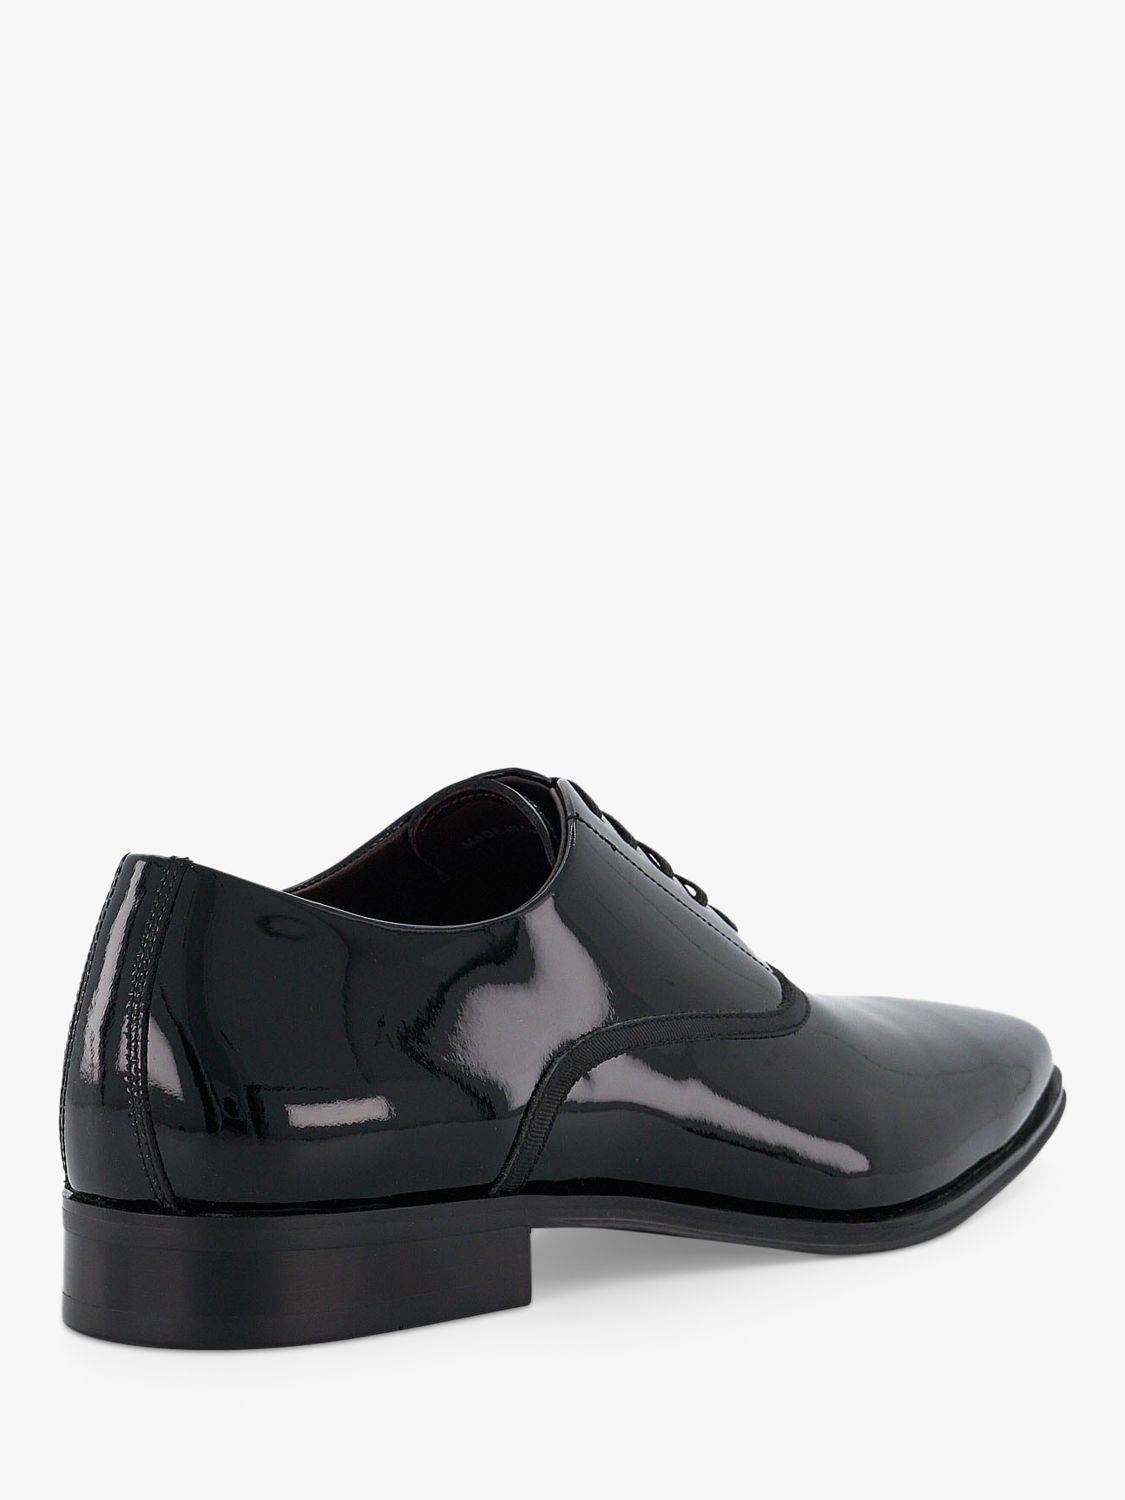 Dune Swallow Patent Leather Oxford Shoes, Black, 8